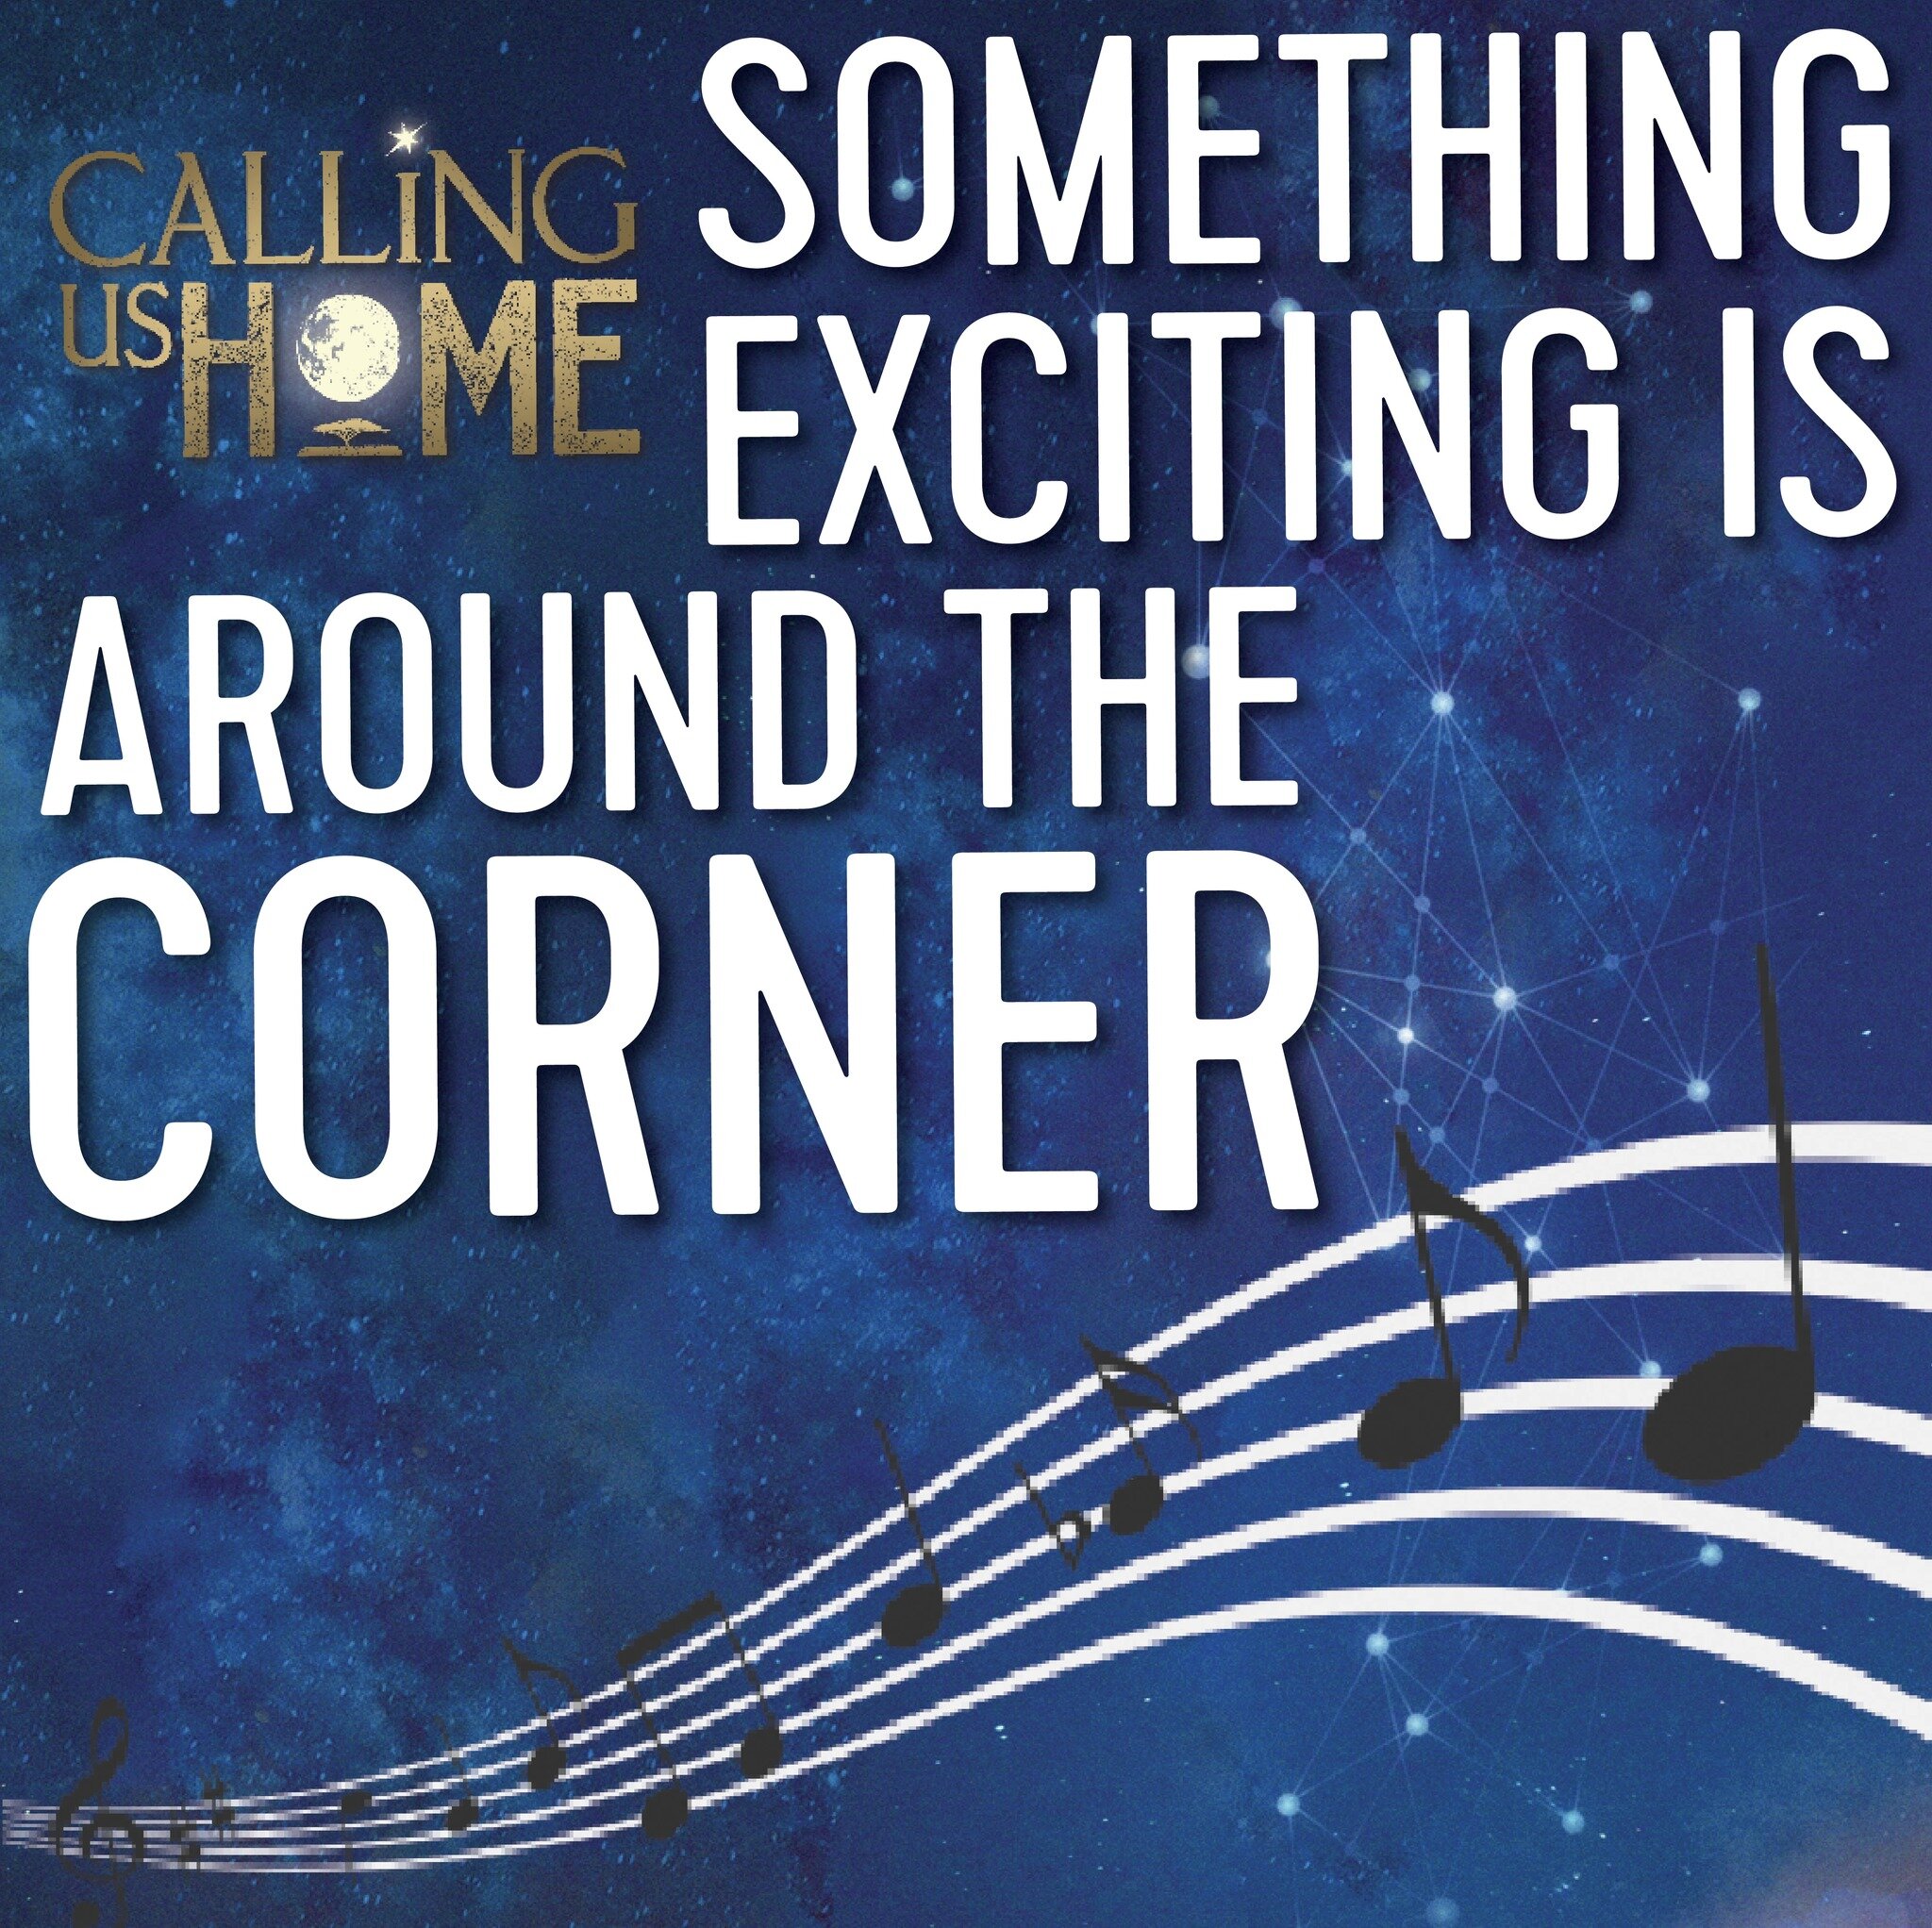 🎶 something exciting is around the corner 🎶

We have SO much in store for our audiences and listeners in Cape Town and around the World. Keep your eyes and ears peeled, as we are about to knock your socks off!!

#music #cast

#CallingUsHome #Callin